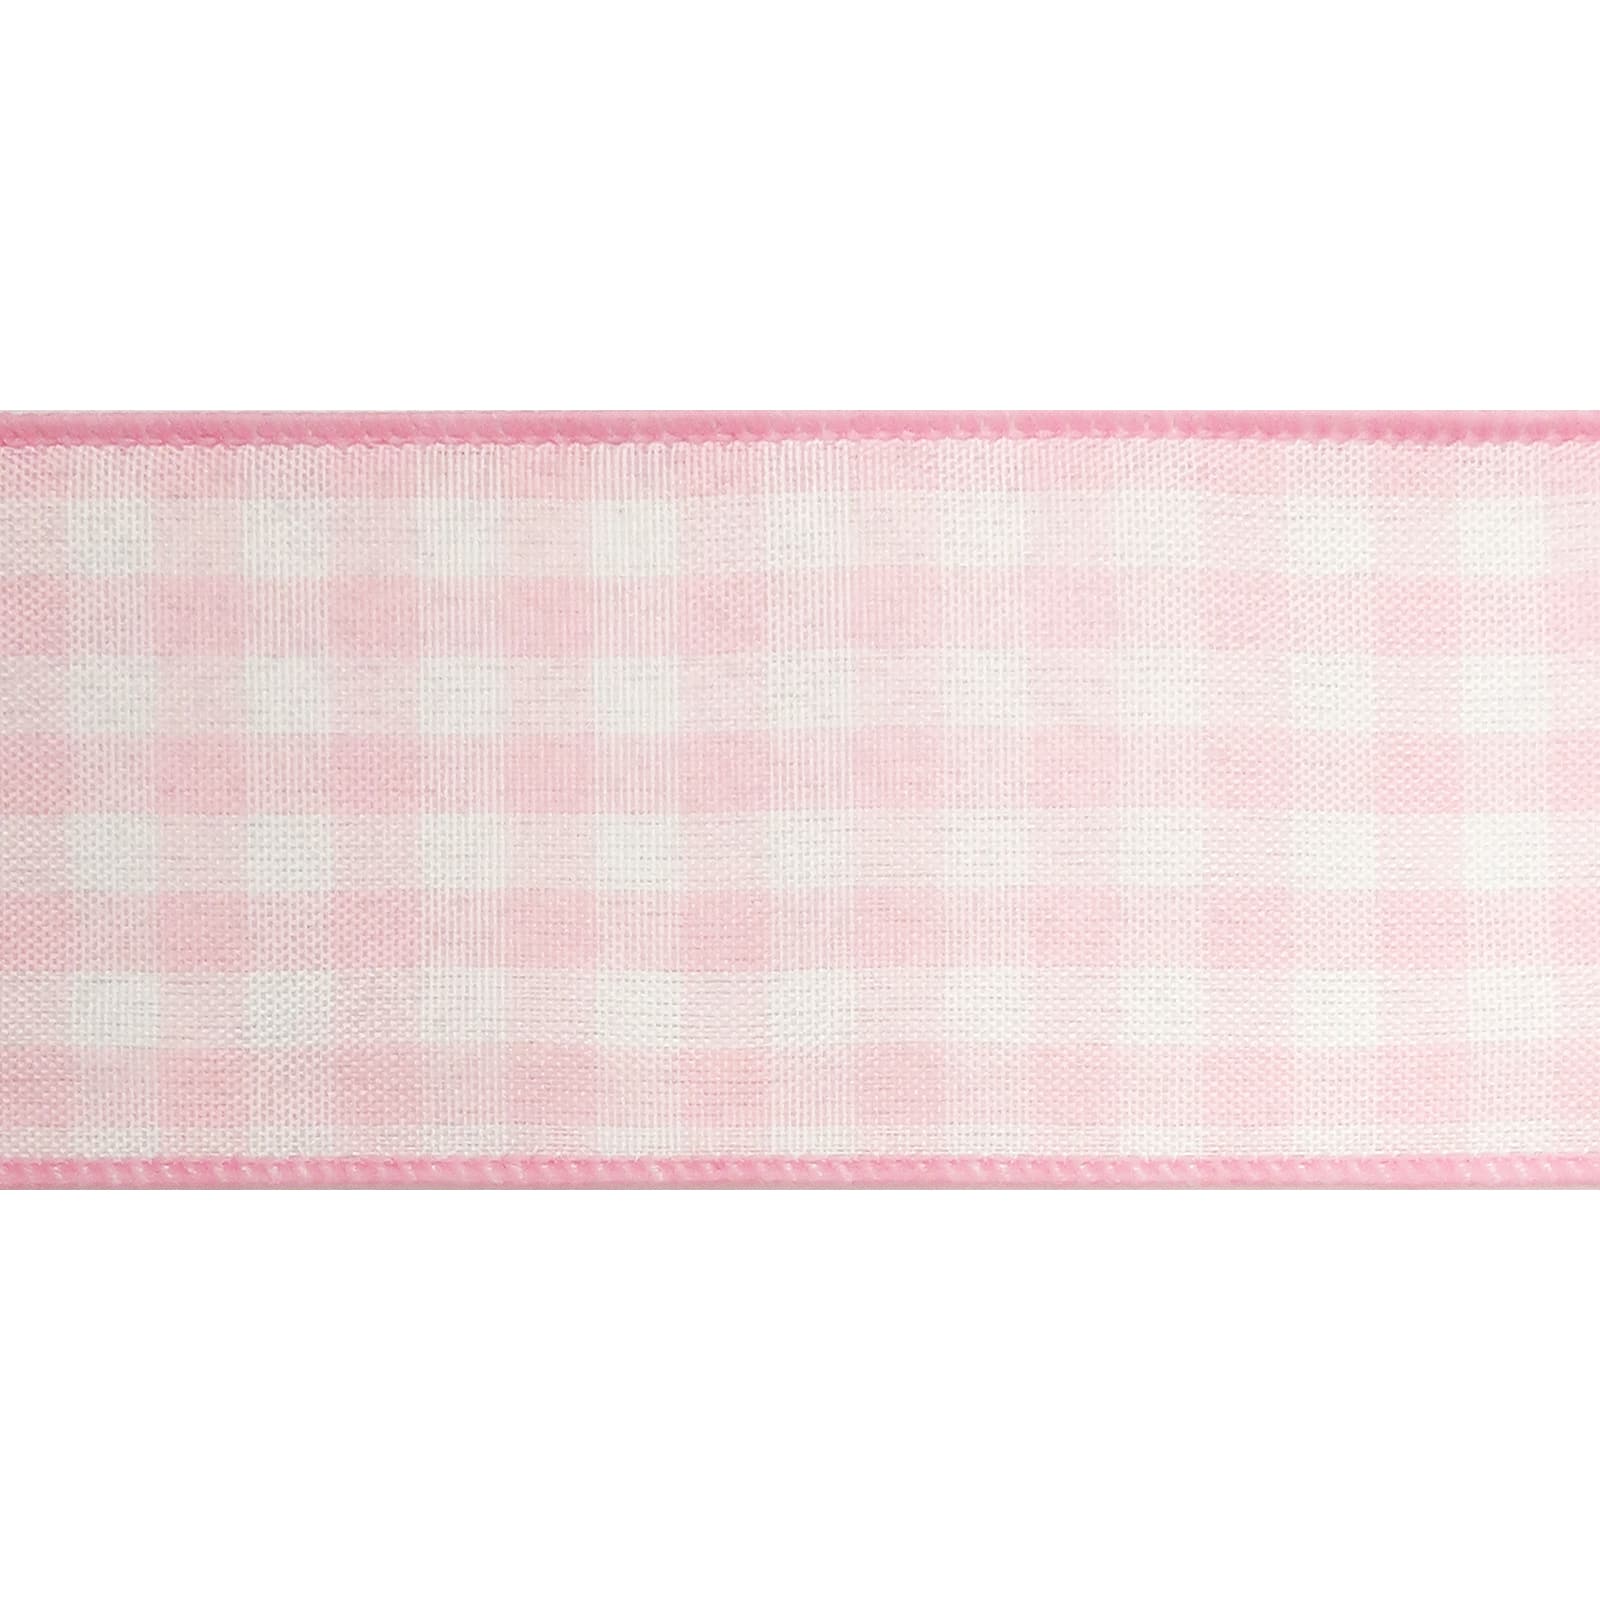 2.5 Red & White Gingham Wired Ribbon by Celebrate It | 2.5 x 25ft | Michaels